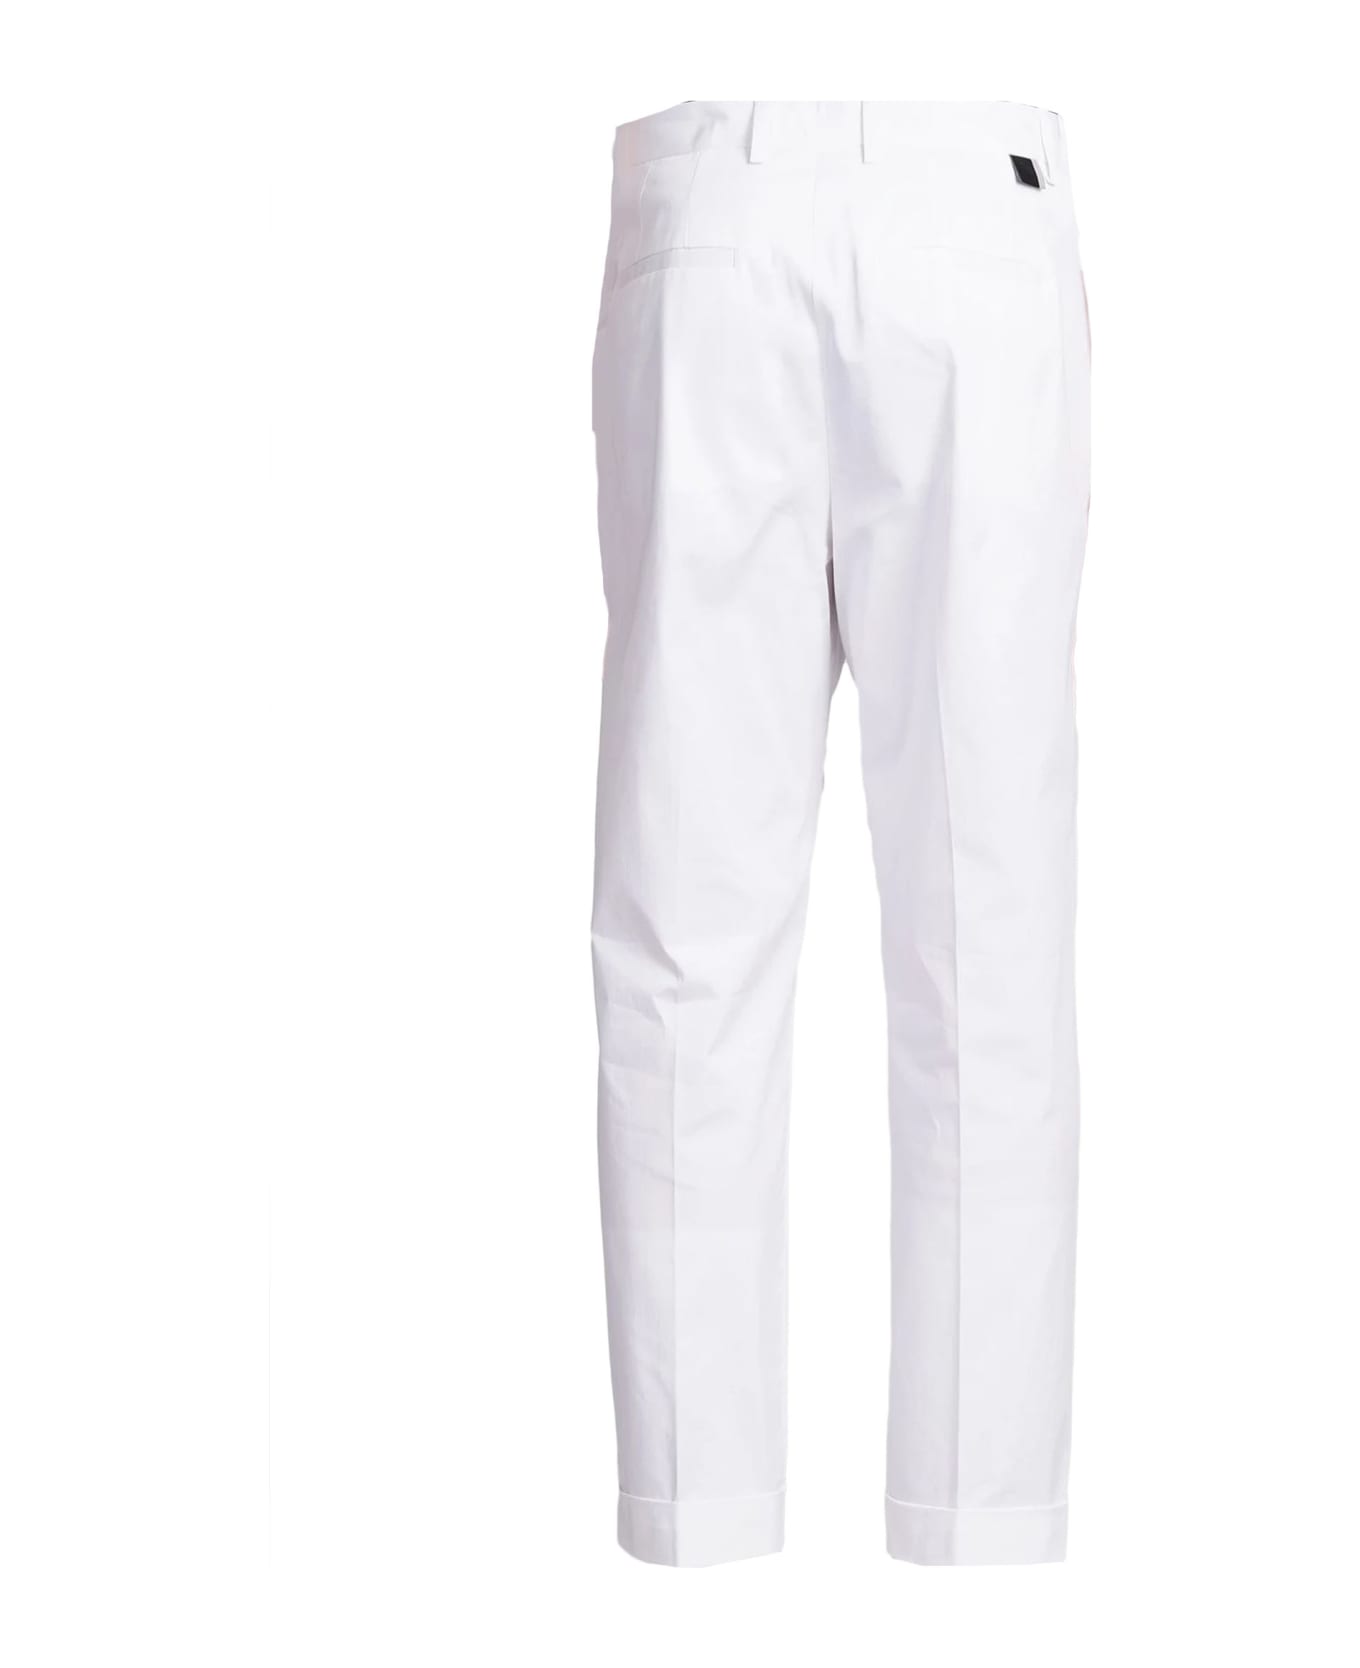 Low Brand Trousers White - White